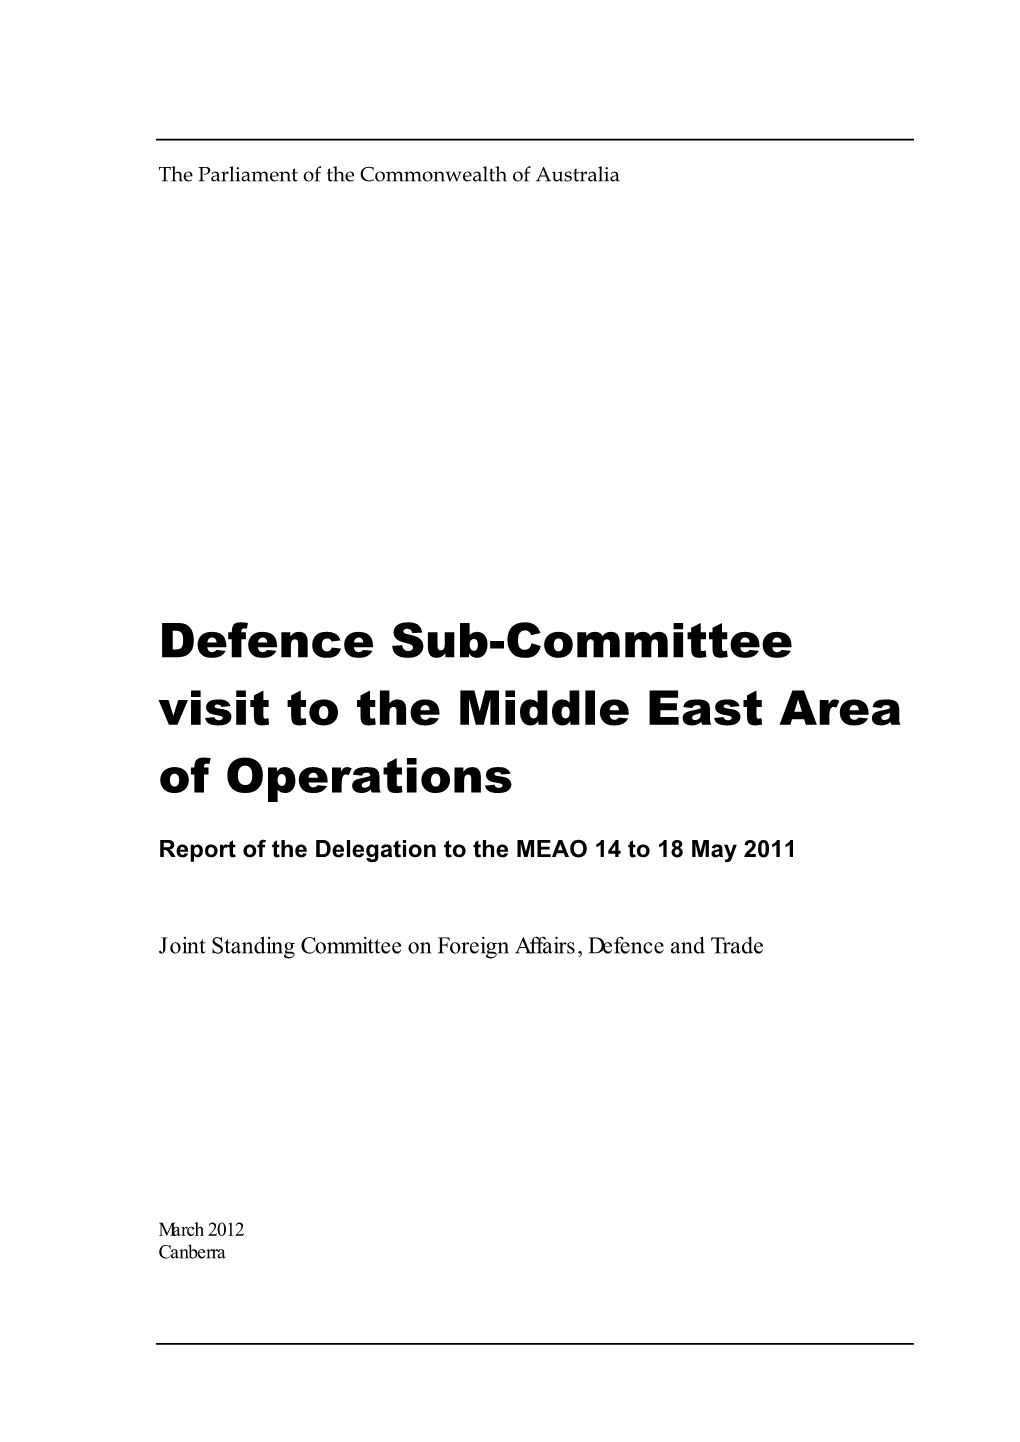 Defence Sub-Committee Visit to the Middle East Area of Operations